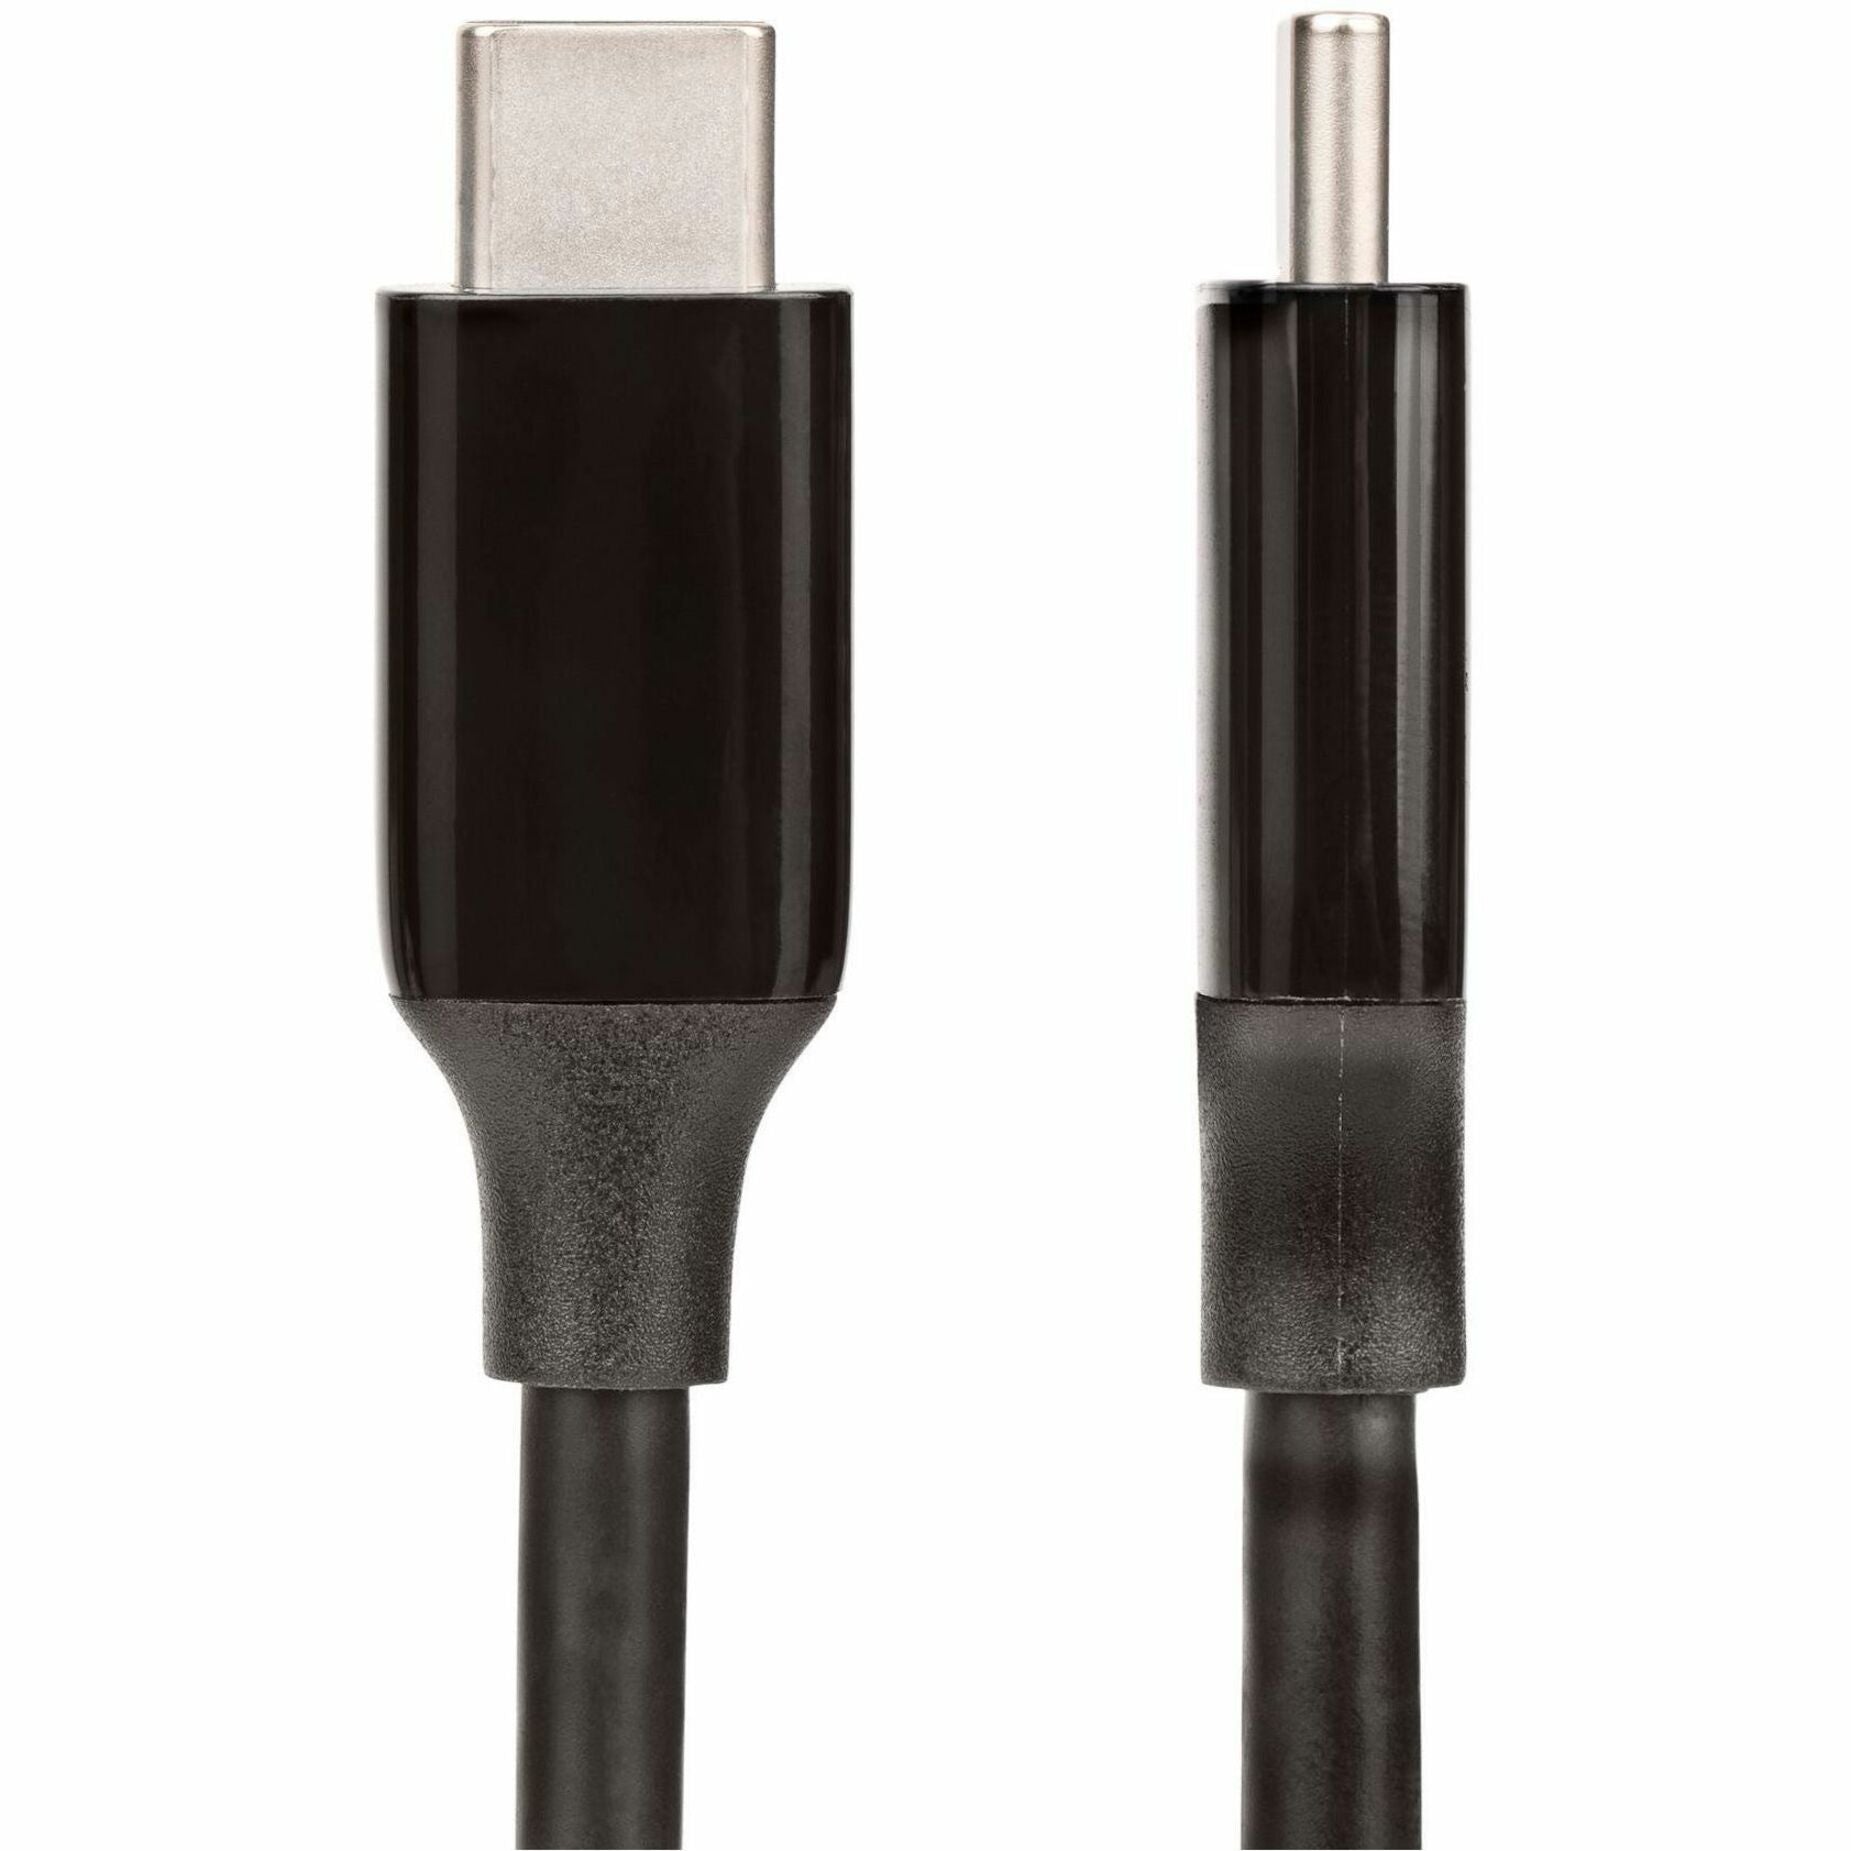 StarTech.com UCC-3M-10G-USB-CABLE USB-C Data Transfer Cable, 10 Gbit/s, 9.84 ft